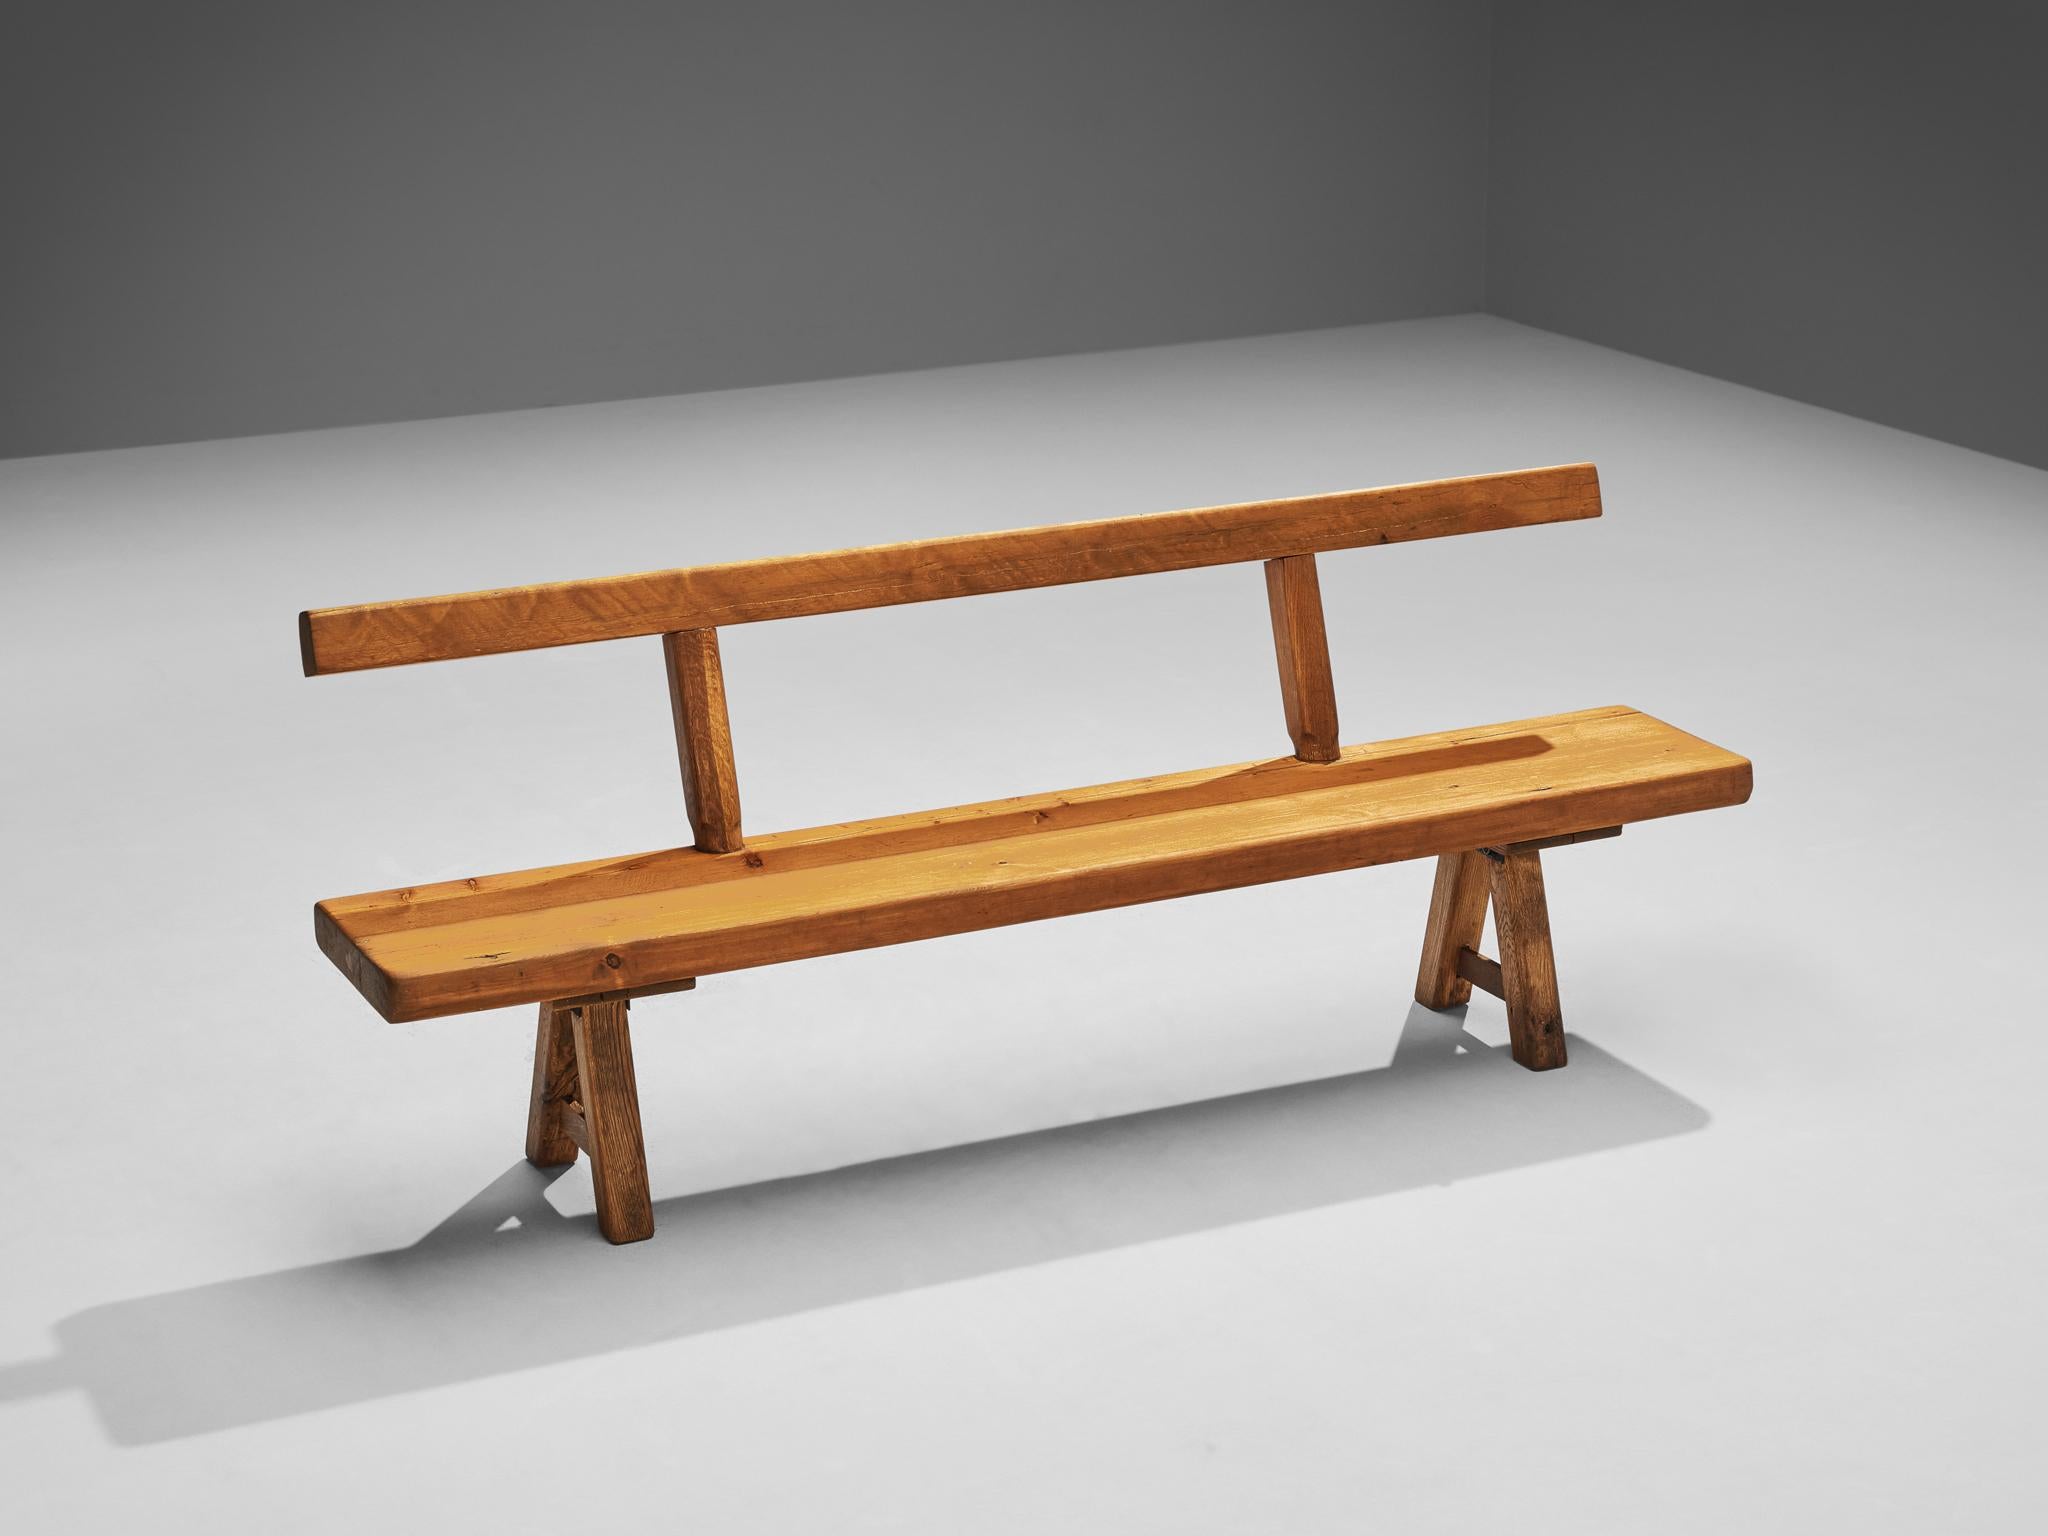 Mobichalet, long bench, oak, pine, Belgium, 1950s

This rustic bench will come forward nicely in a relaxing atmosphere, like a patio or a studio space. The brutalist appearance is expressed through robust forms and strong lines. The viewer can